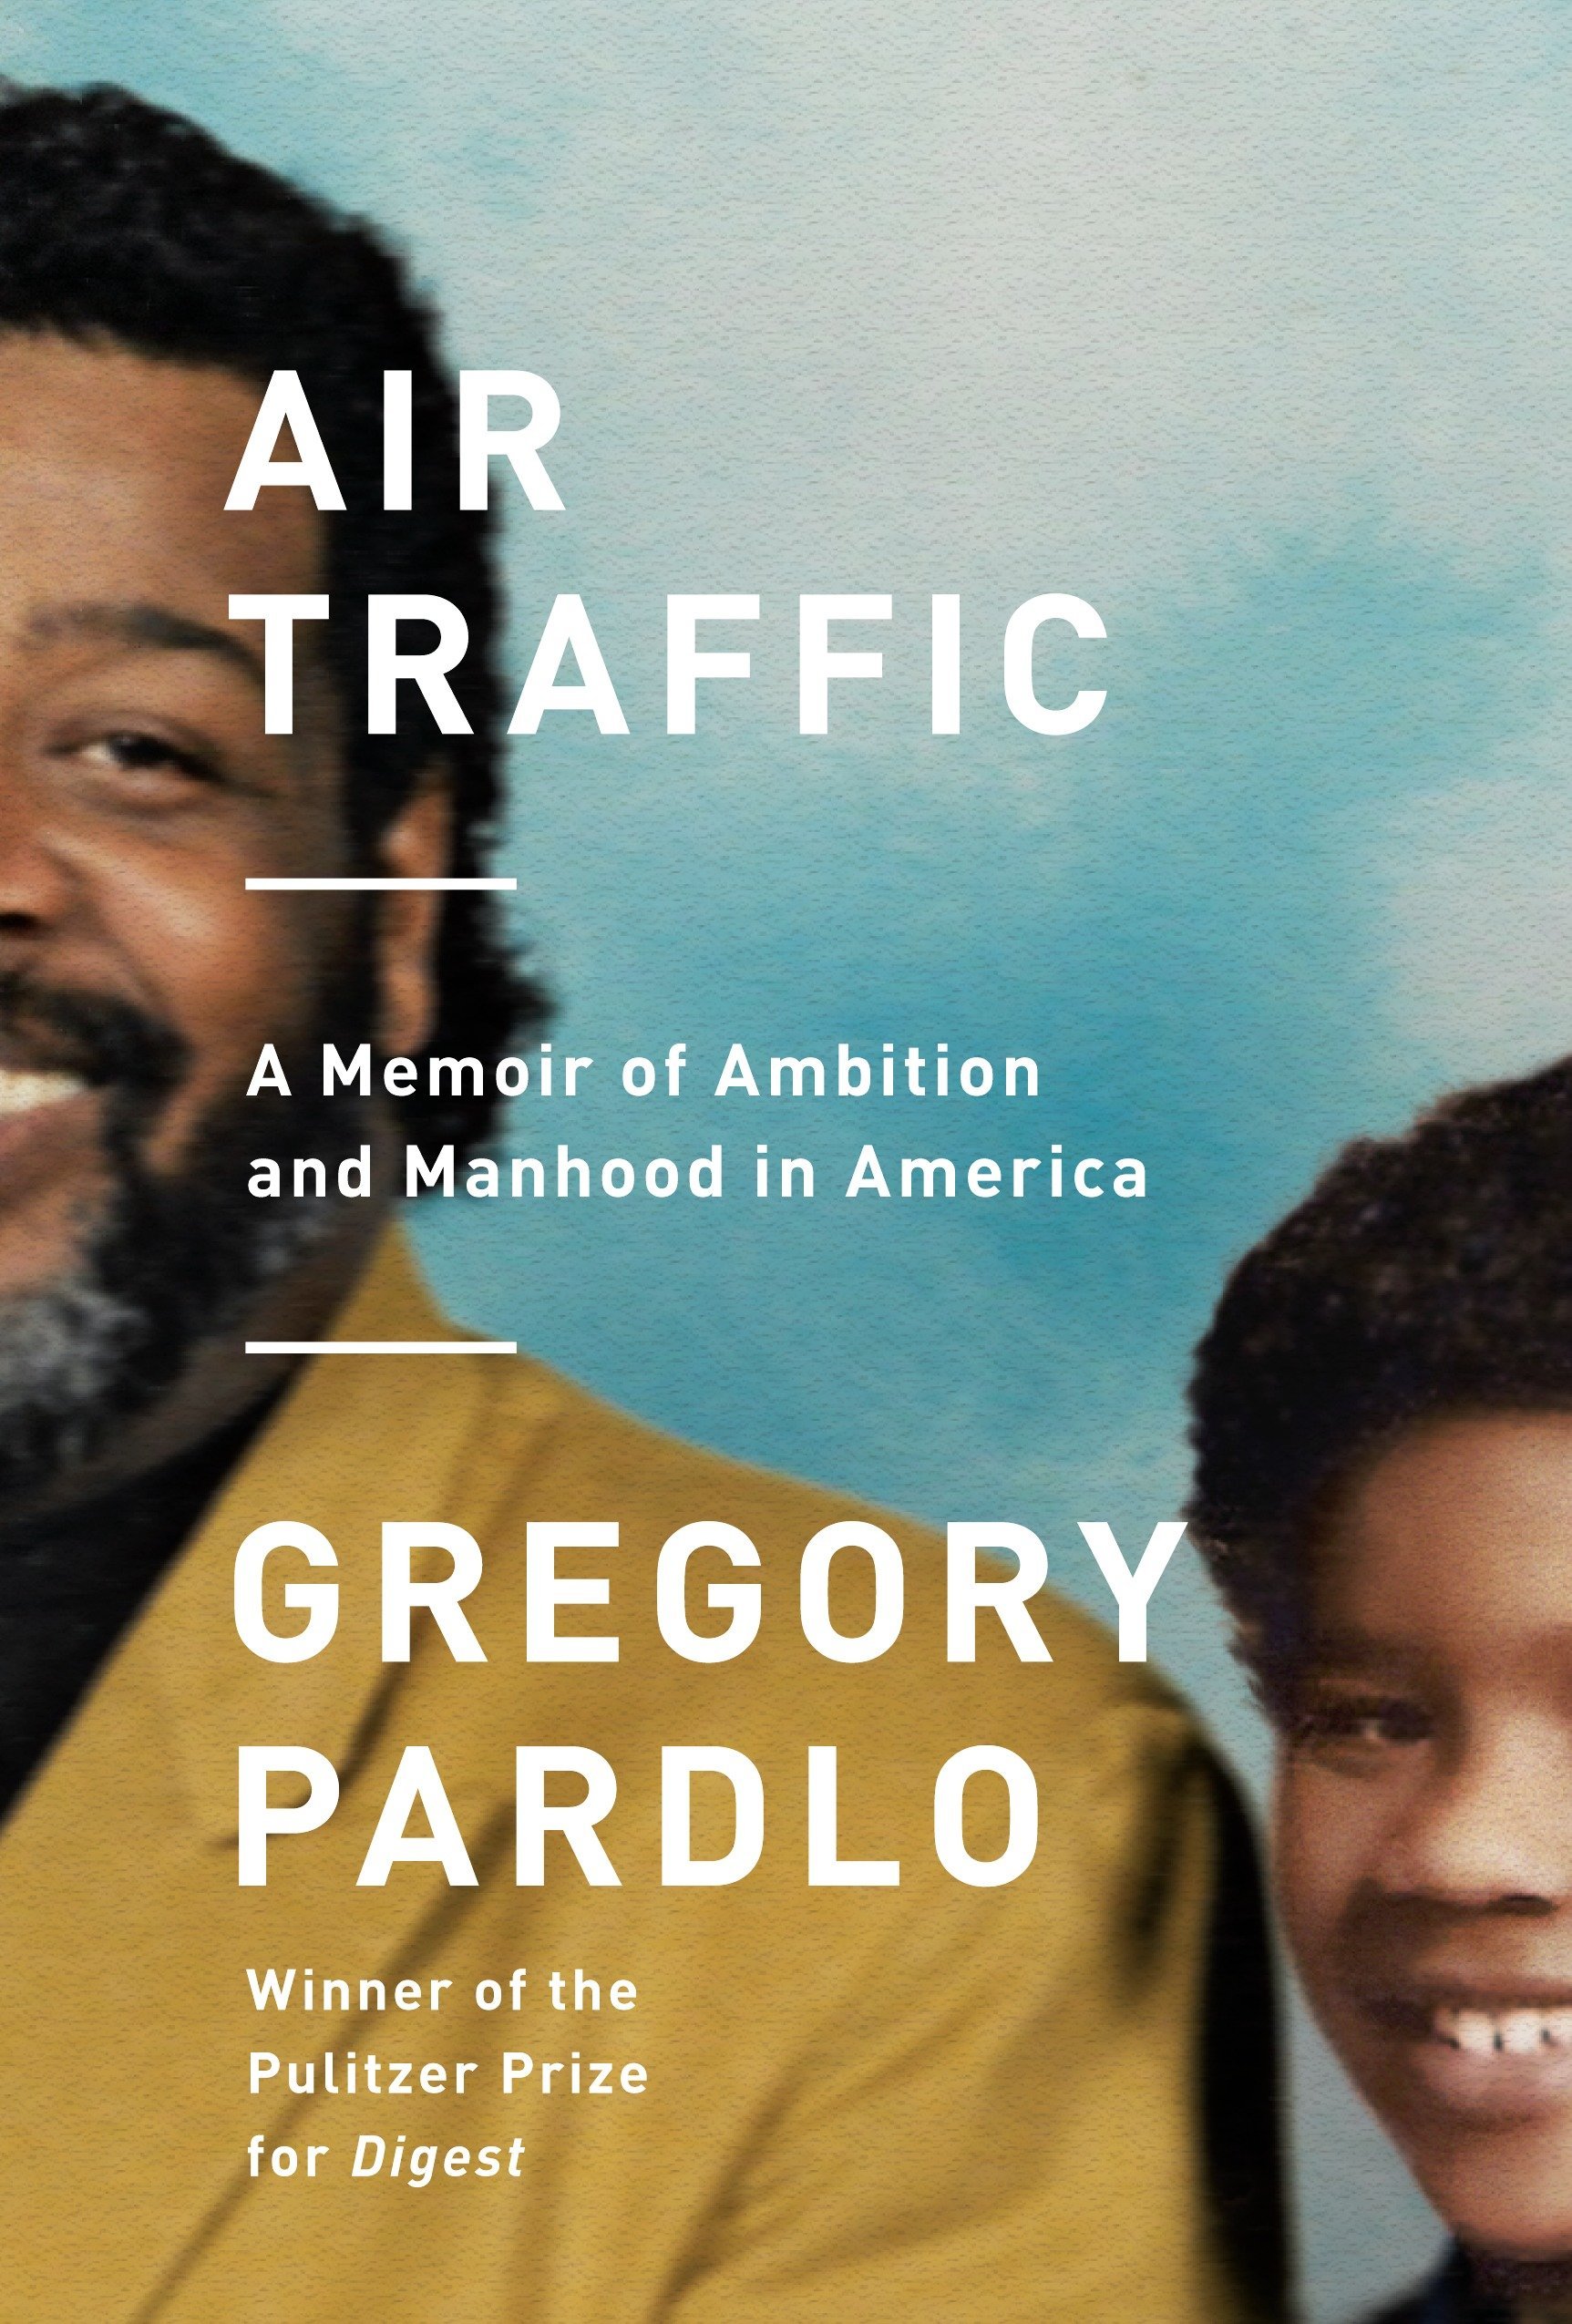 Image of "Air traffic : a memoir of ambition and manhood in America"